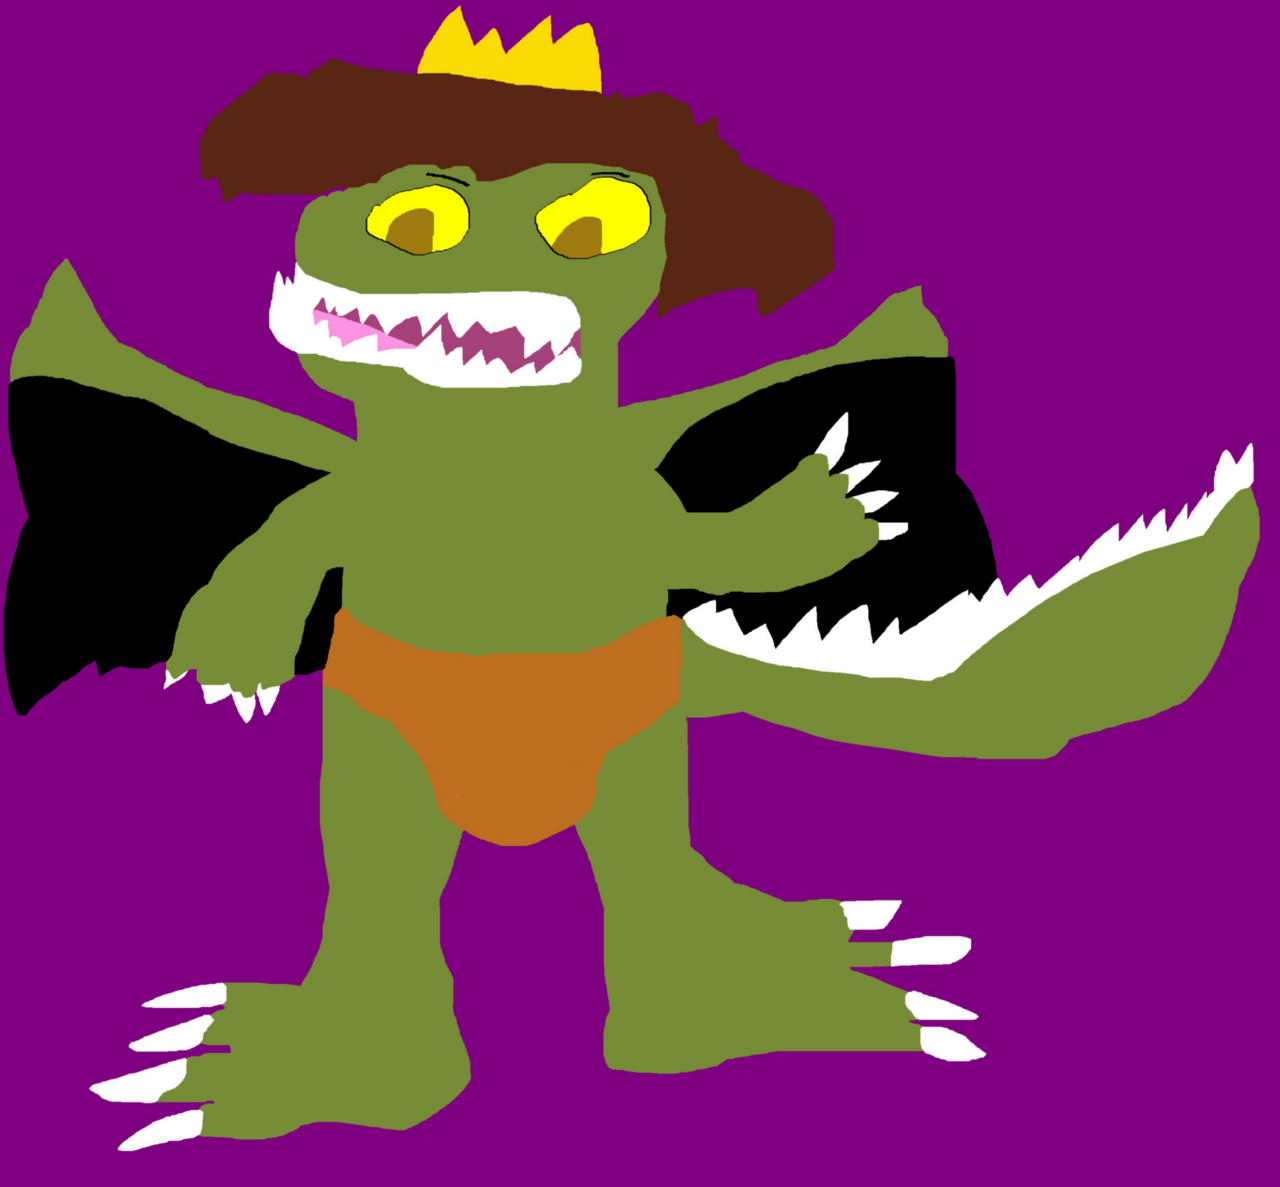 Arthur the winged humanoid lizard king Request MS Paint by Falconlobo